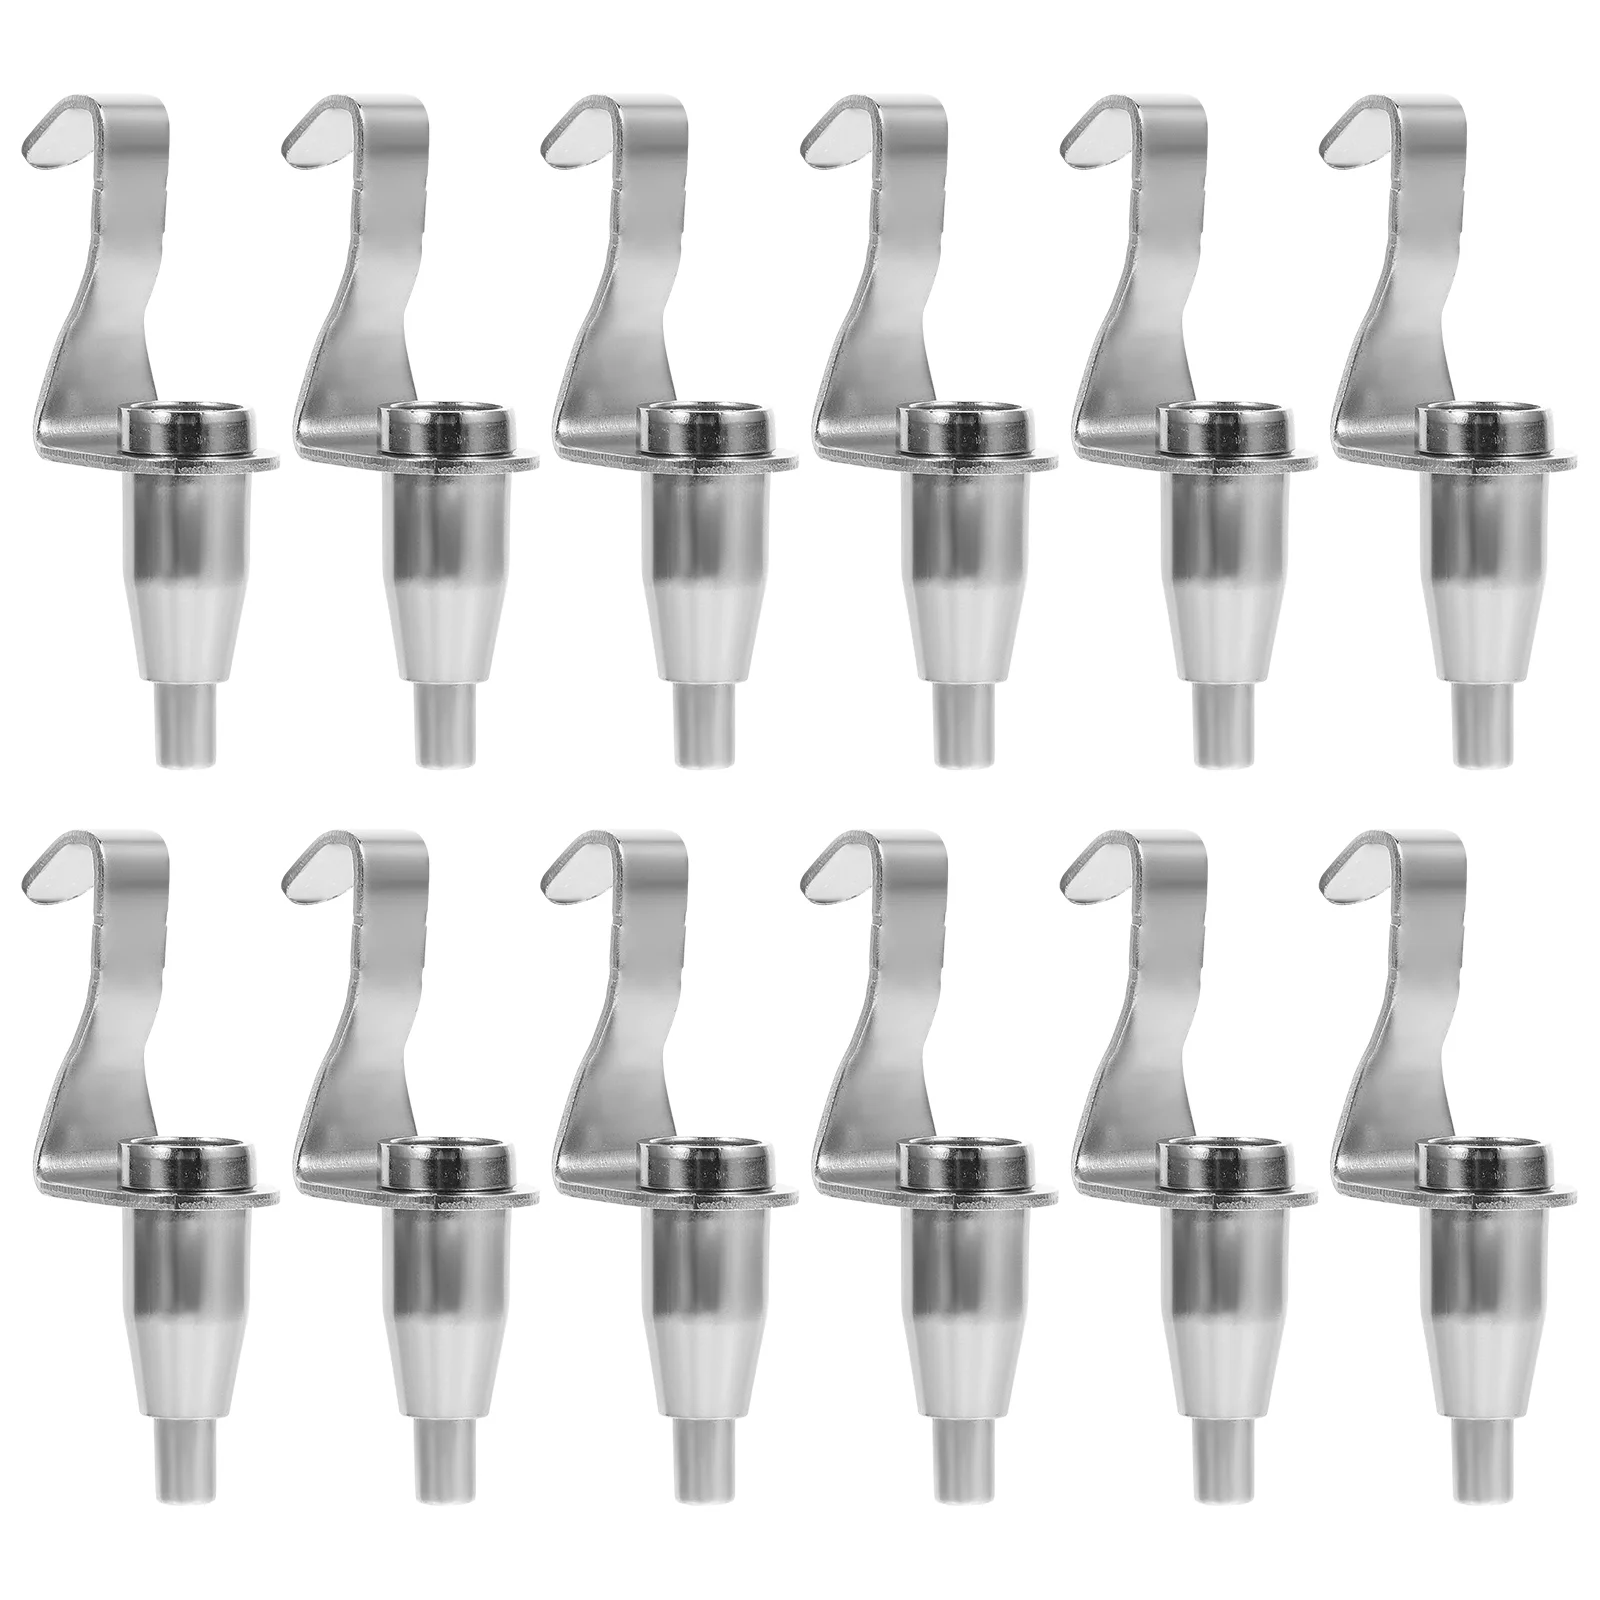 

12Pcs Adjustable Metal Gallery Display Metal Hangers Picture Rail Hooks Hanger System Accessories for Wire Rope